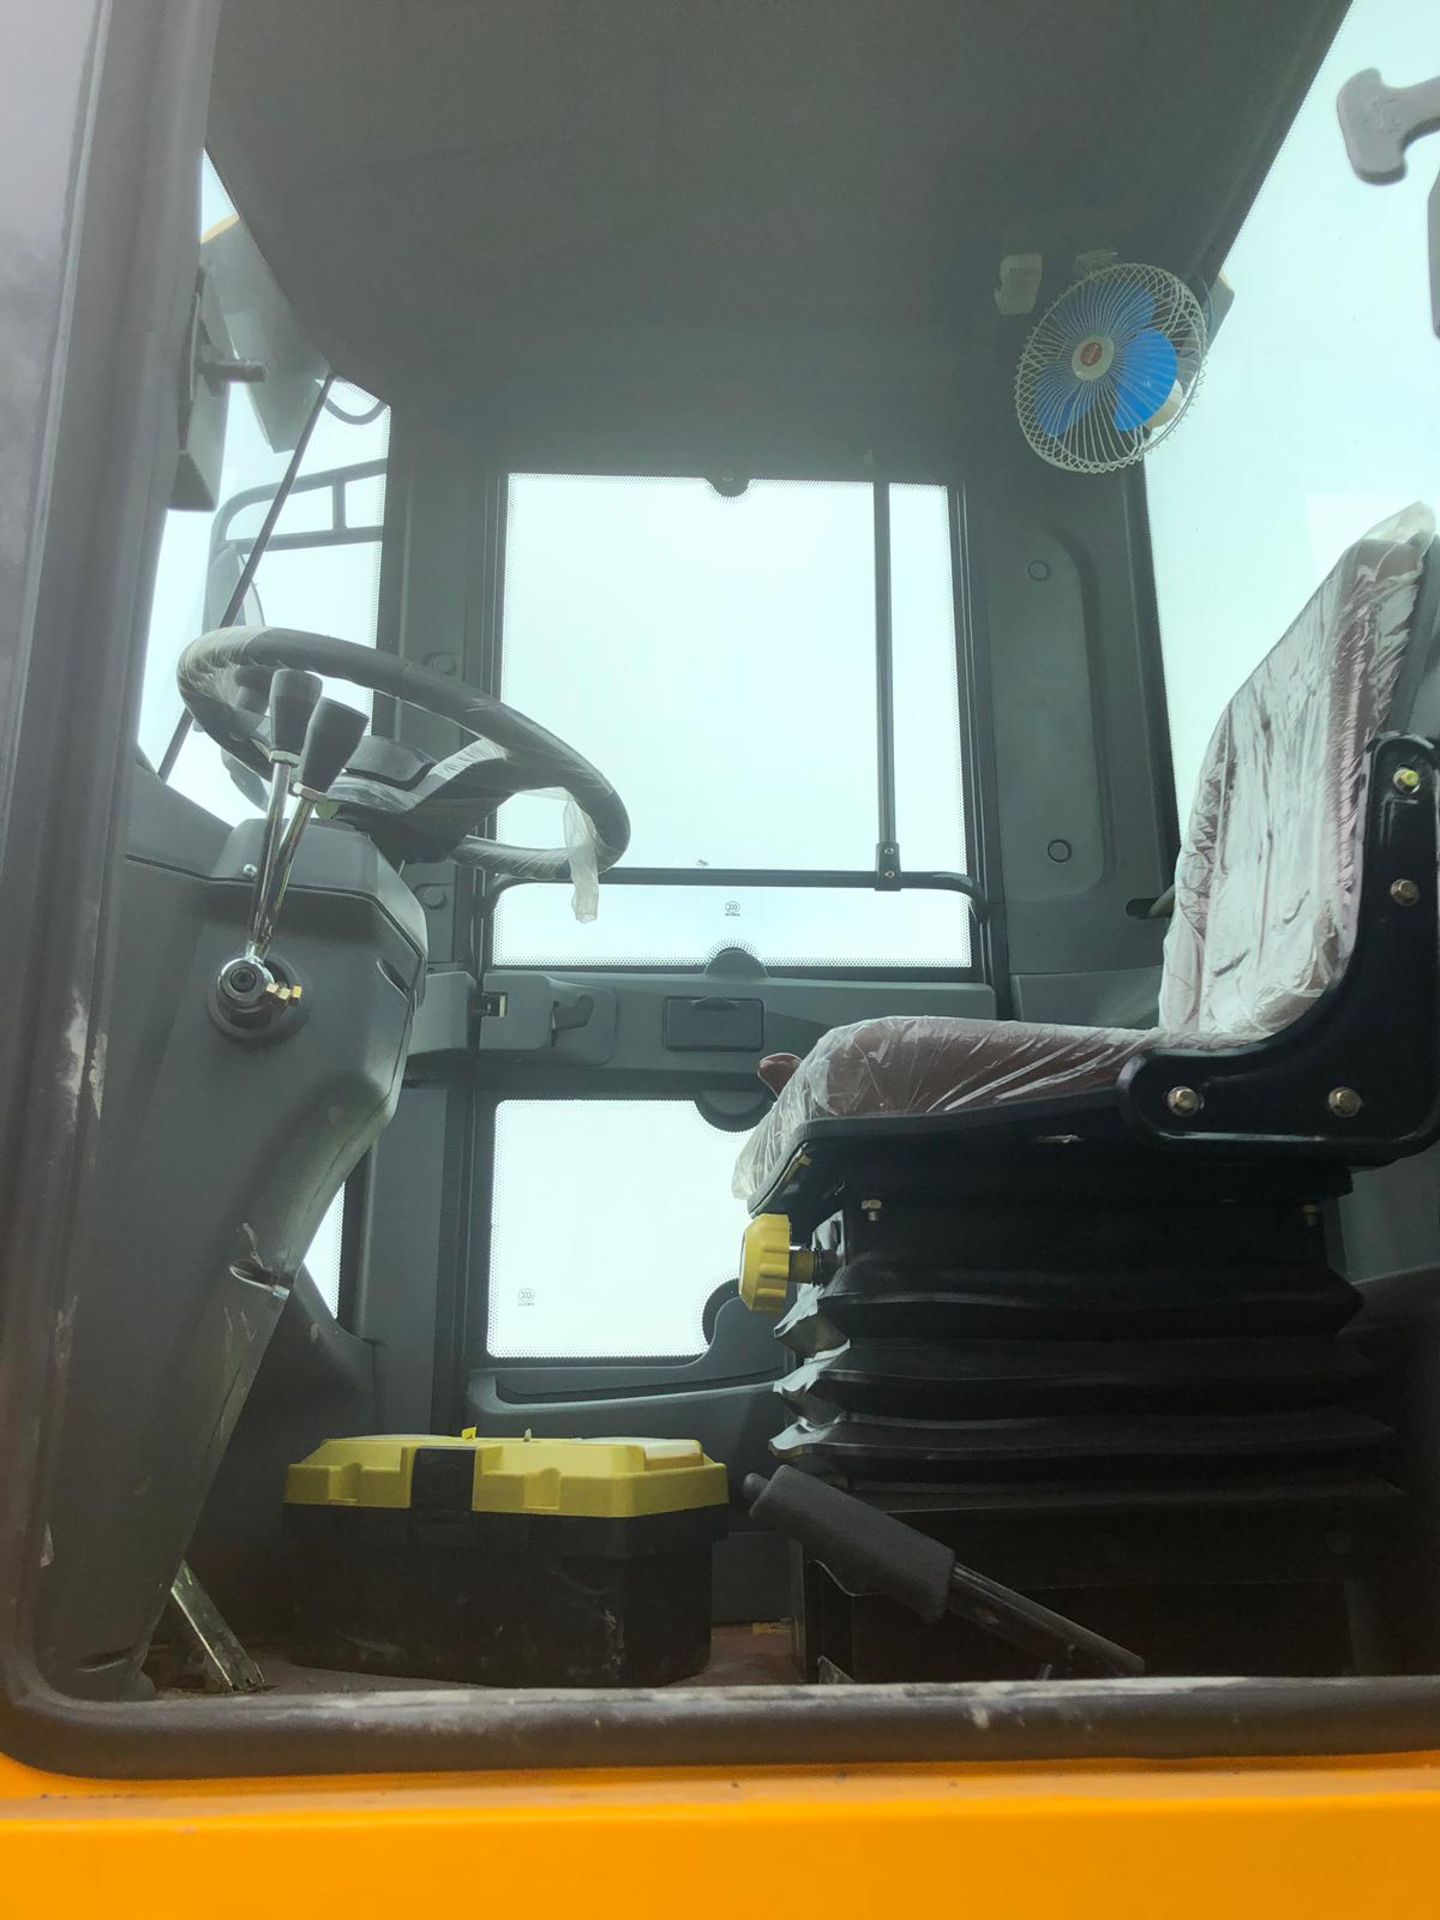 2019 BRAND NEW AND UNUSED ATTACK 1830 WHEEL LOADER, RUNS WORKS AND LIFTS *PLUS VAT* - Image 6 of 8